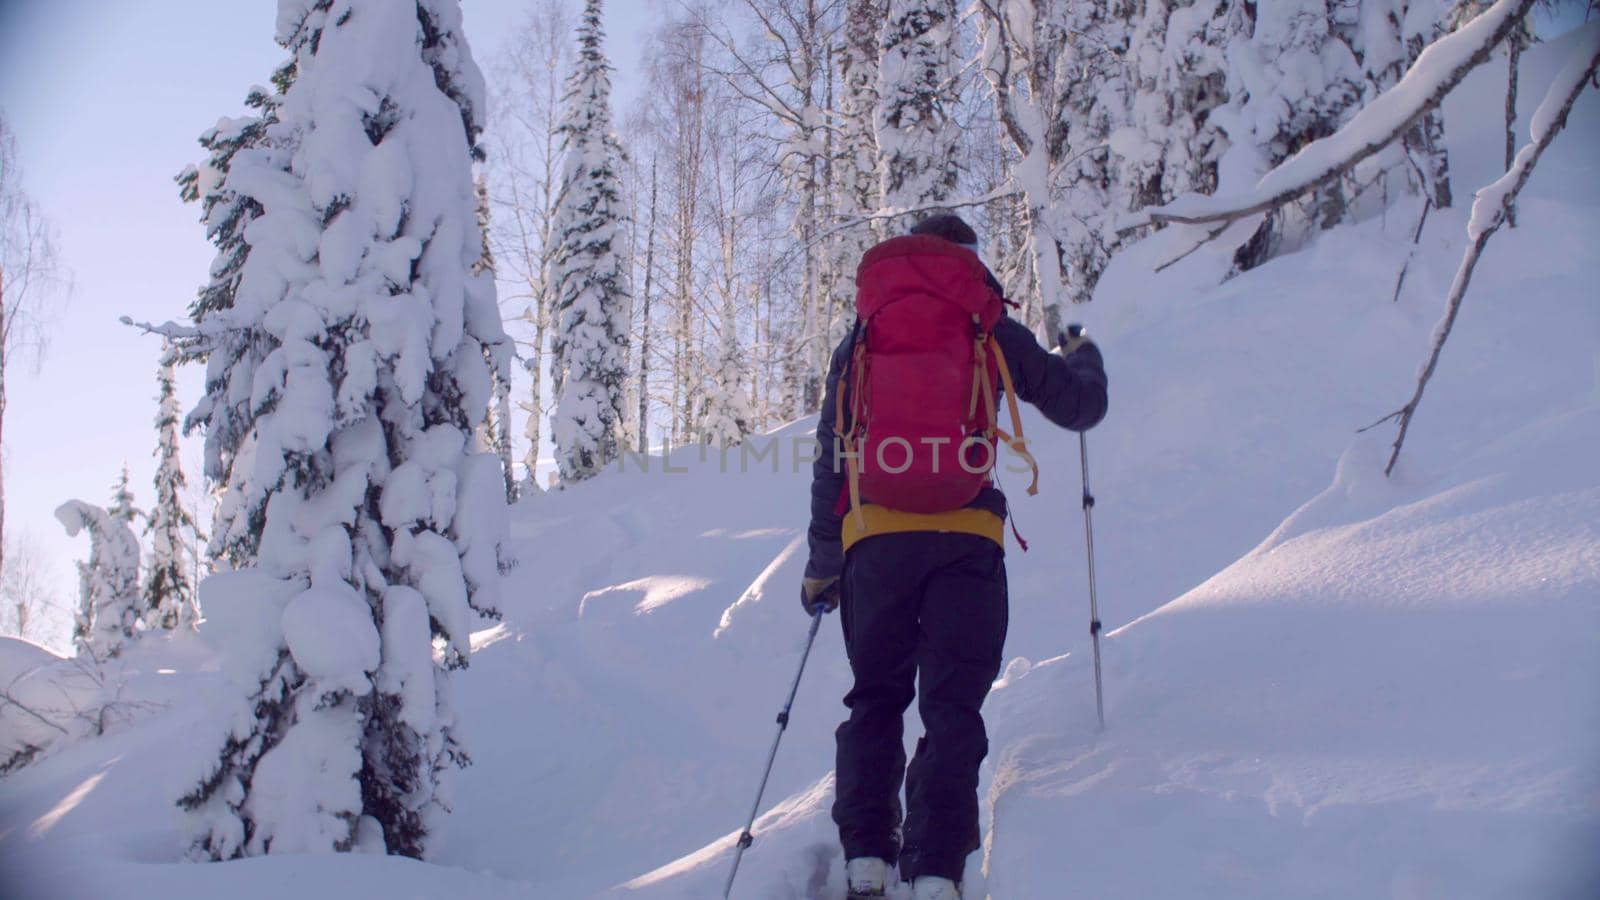 A man skiing in a snowy forest. by Chudakov